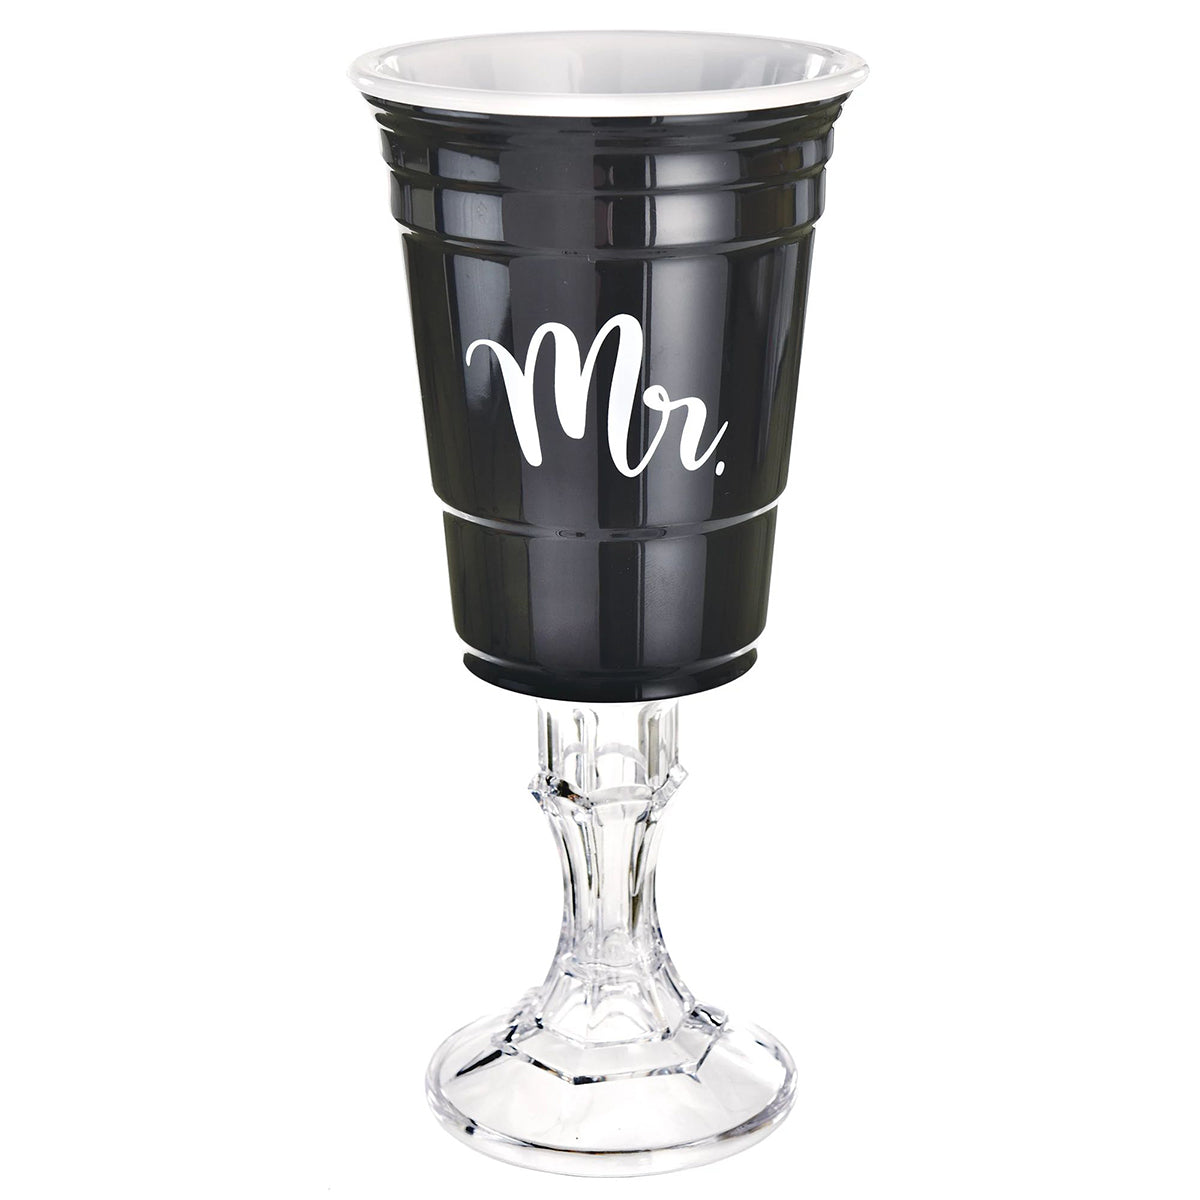 AMSCAN CA Bridal Shower Bridal Shower Black "Mr." Plastic Cup With Stand, Luxurious Shower Collection, 15 oz, 1 Count 192937314739